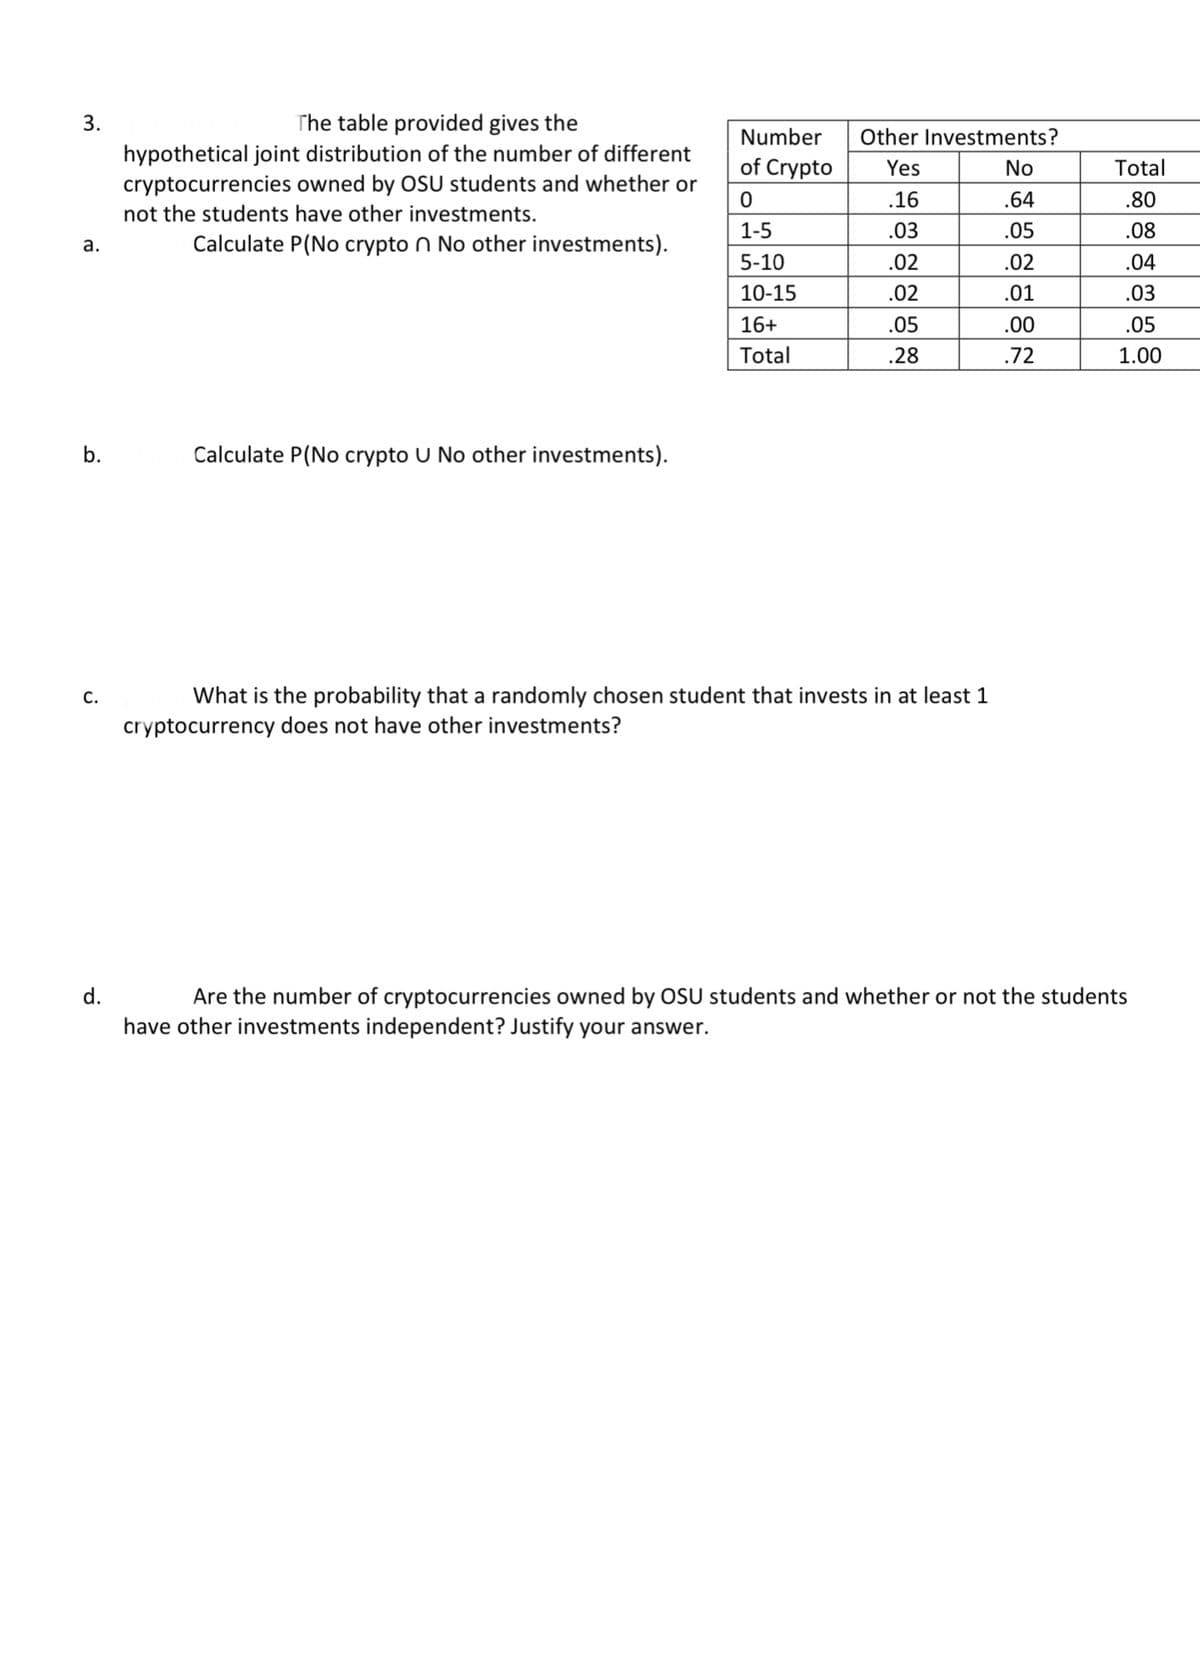 3.
The table provided gives the
Number
Other Investments?
hypothetical joint distribution of the number of different
cryptocurrencies owned by OSU students and whether or
not the students have other investments.
of Crypto
Yes
No
Total
.16
.64
.80
1-5
.03
.05
.08
а.
Calculate P(No crypto n No other investments).
5-10
.02
.02
.04
10-15
.02
.01
.03
16+
.05
.00
.05
Total
.28
.72
1.00
b.
Calculate P(No crypto U No other investments).
C.
What is the probability that a randomly chosen student that invests in at least 1
cryptocurrency does not have other investments?
Are the number of cryptocurrencies owned by OSU students and whether or not the students
have other investments independent? Justify your answer.
d.
